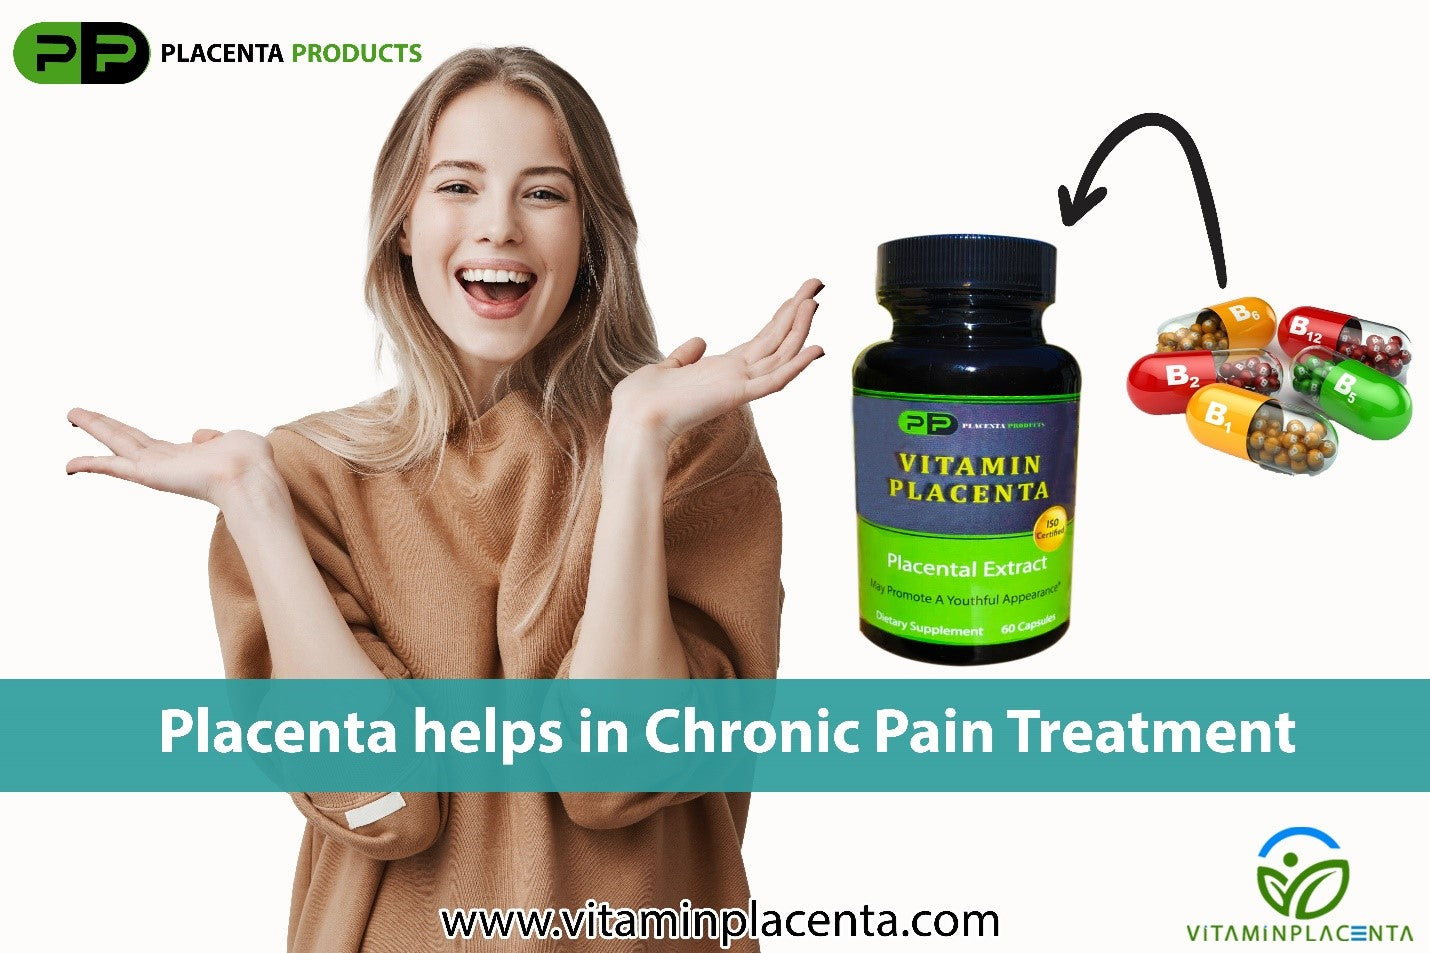 Placenta Helps Reduce Pain